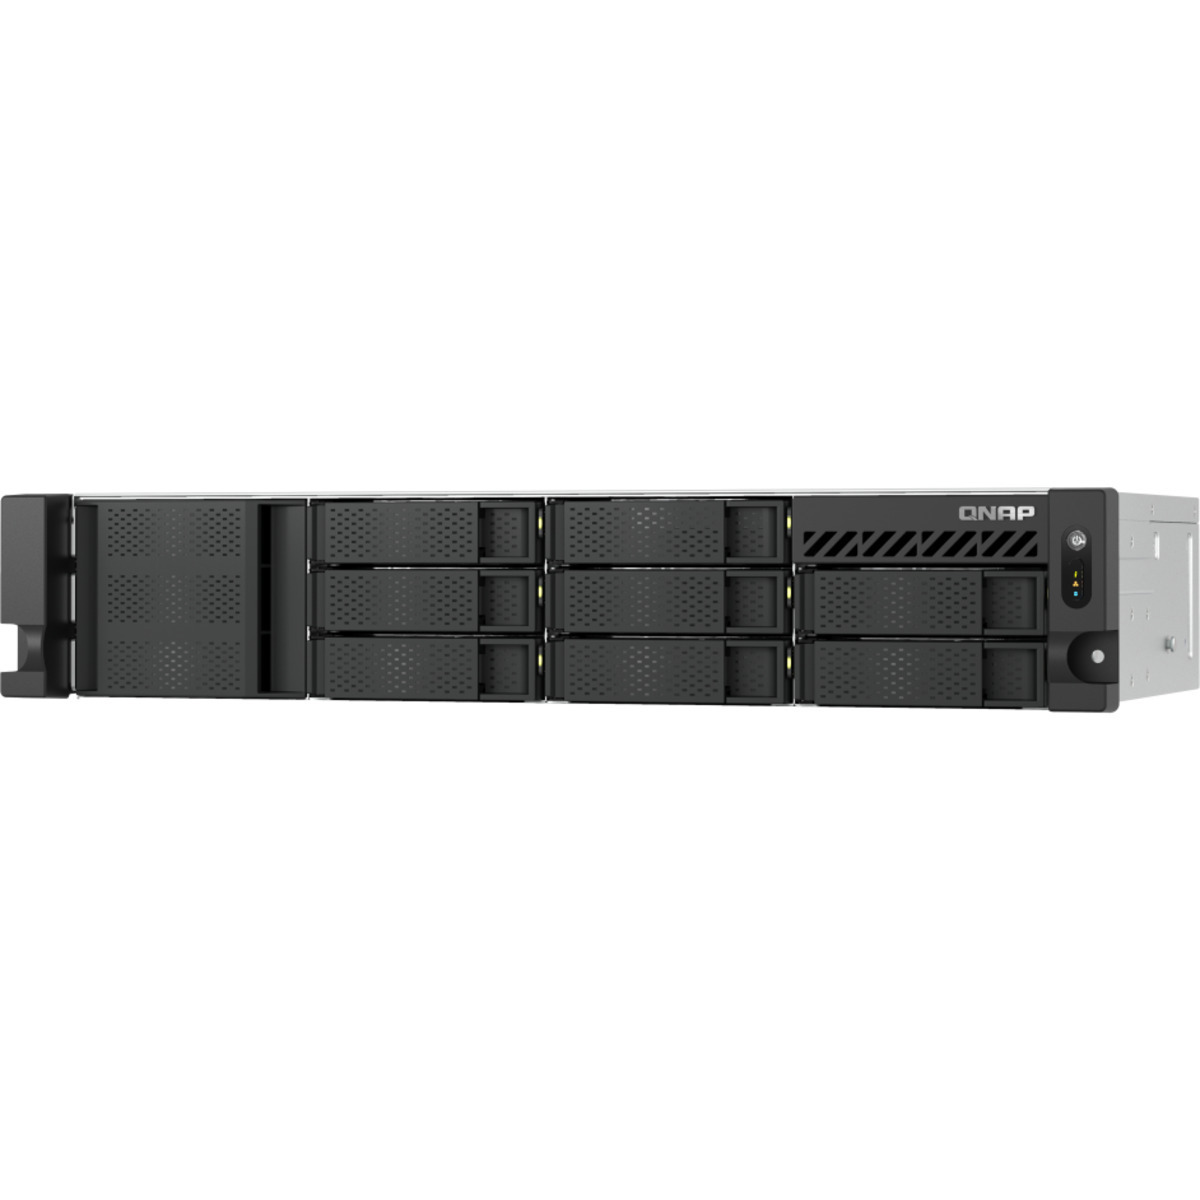 QNAP TS-855eU 40tb 8-Bay RackMount Multimedia / Power User / Business NAS - Network Attached Storage Device 5x8tb TeamGroup EX2 Elite T253E2008T0C101 2.5 550/520MB/s SATA 6Gb/s SSD CONSUMER Class Drives Installed - Burn-In Tested - FREE RAM UPGRADE TS-855eU